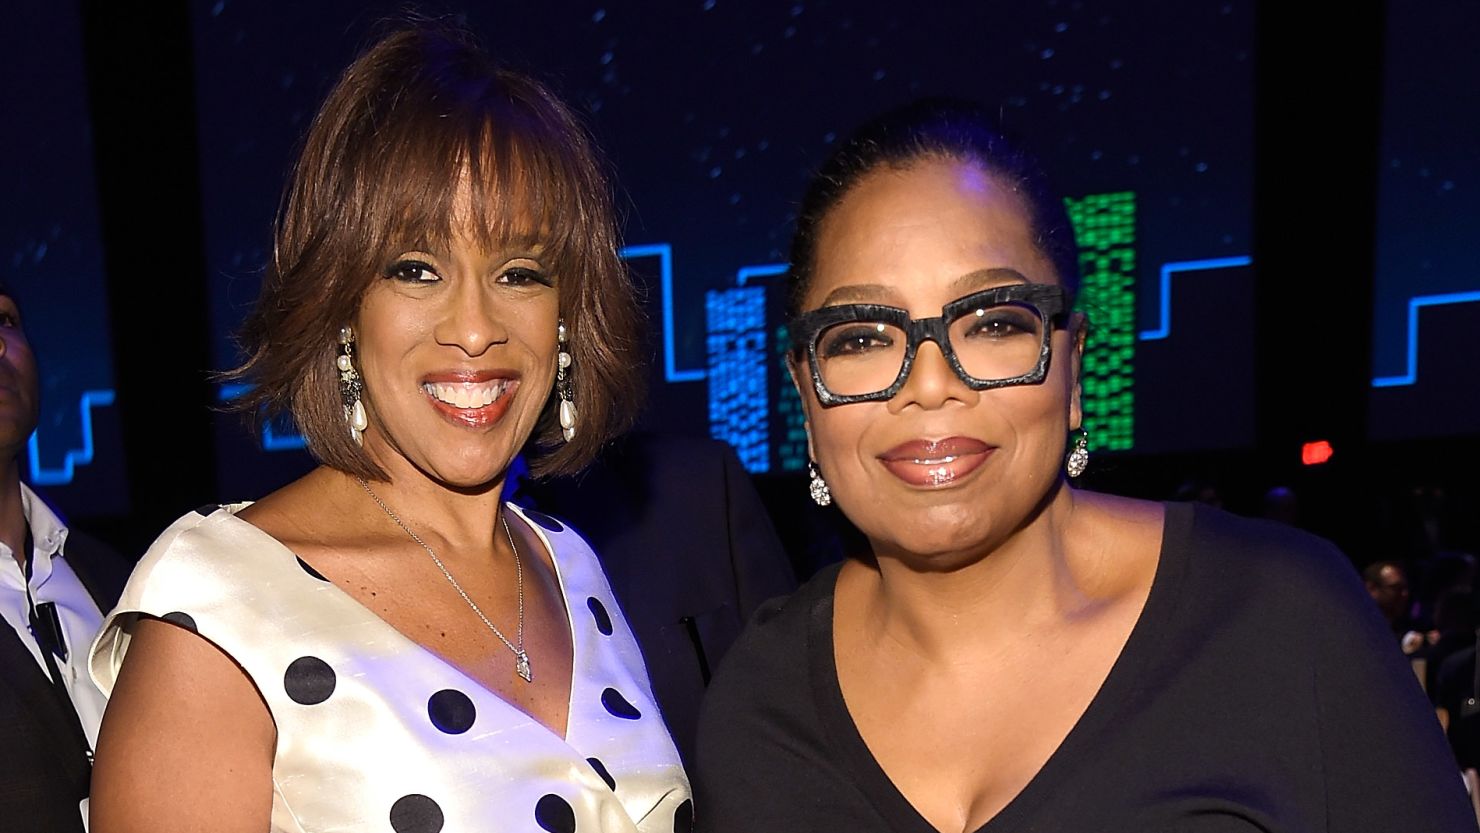 Gayle King and Oprah Winfrey are sharing insight about their long friendship.